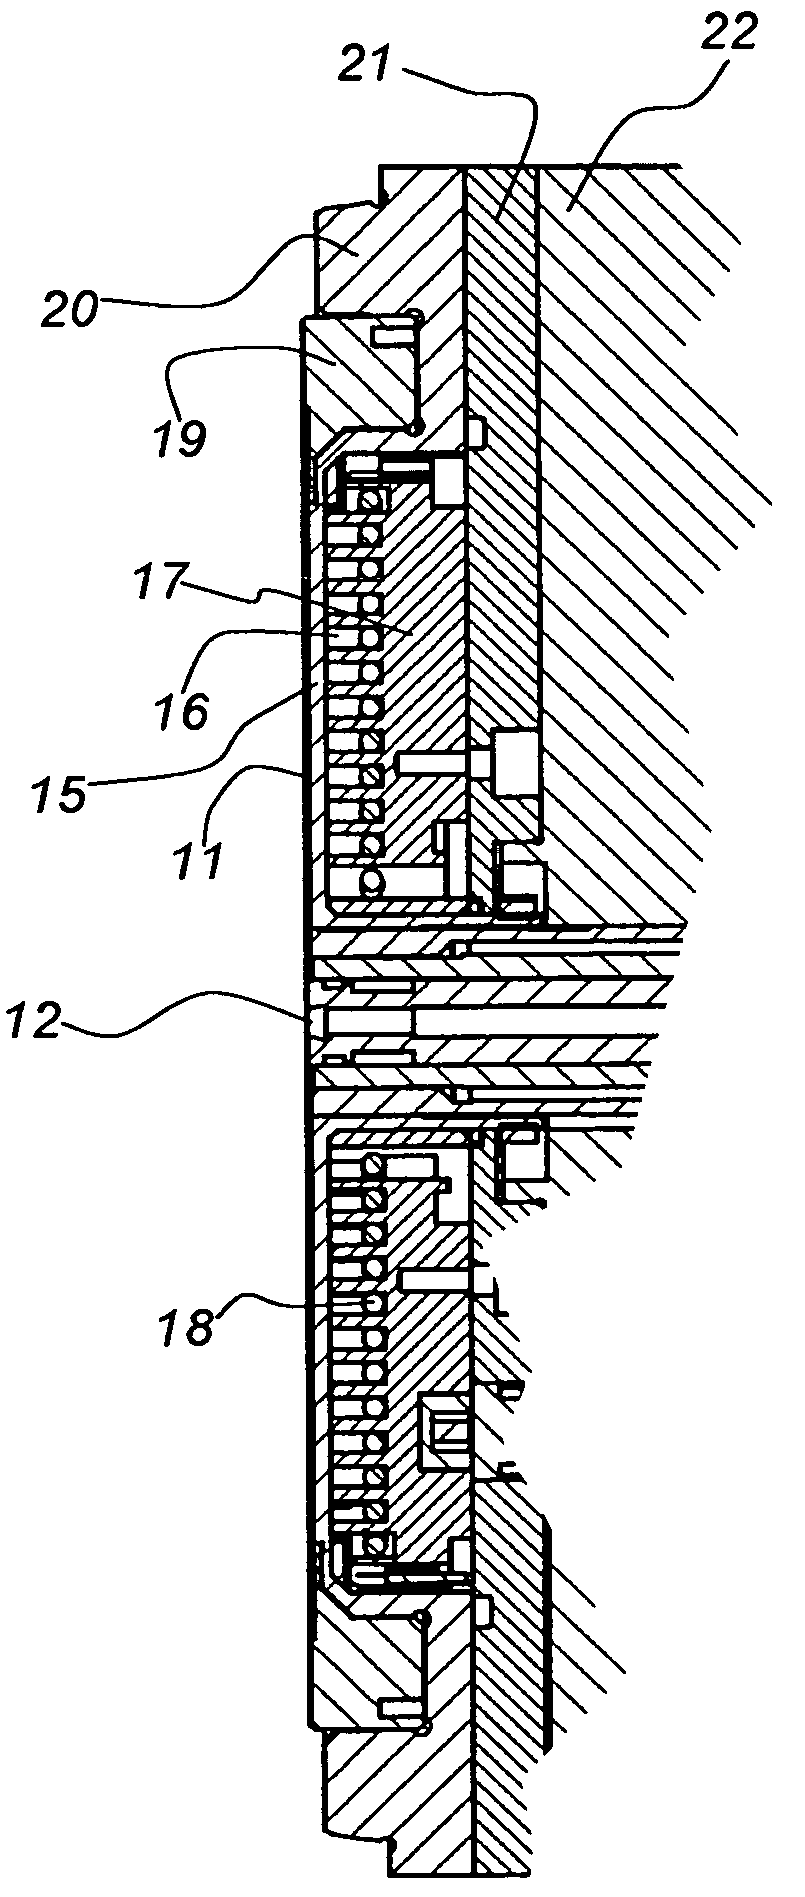 Method and apparatus for injection molding having an inductive coil heater